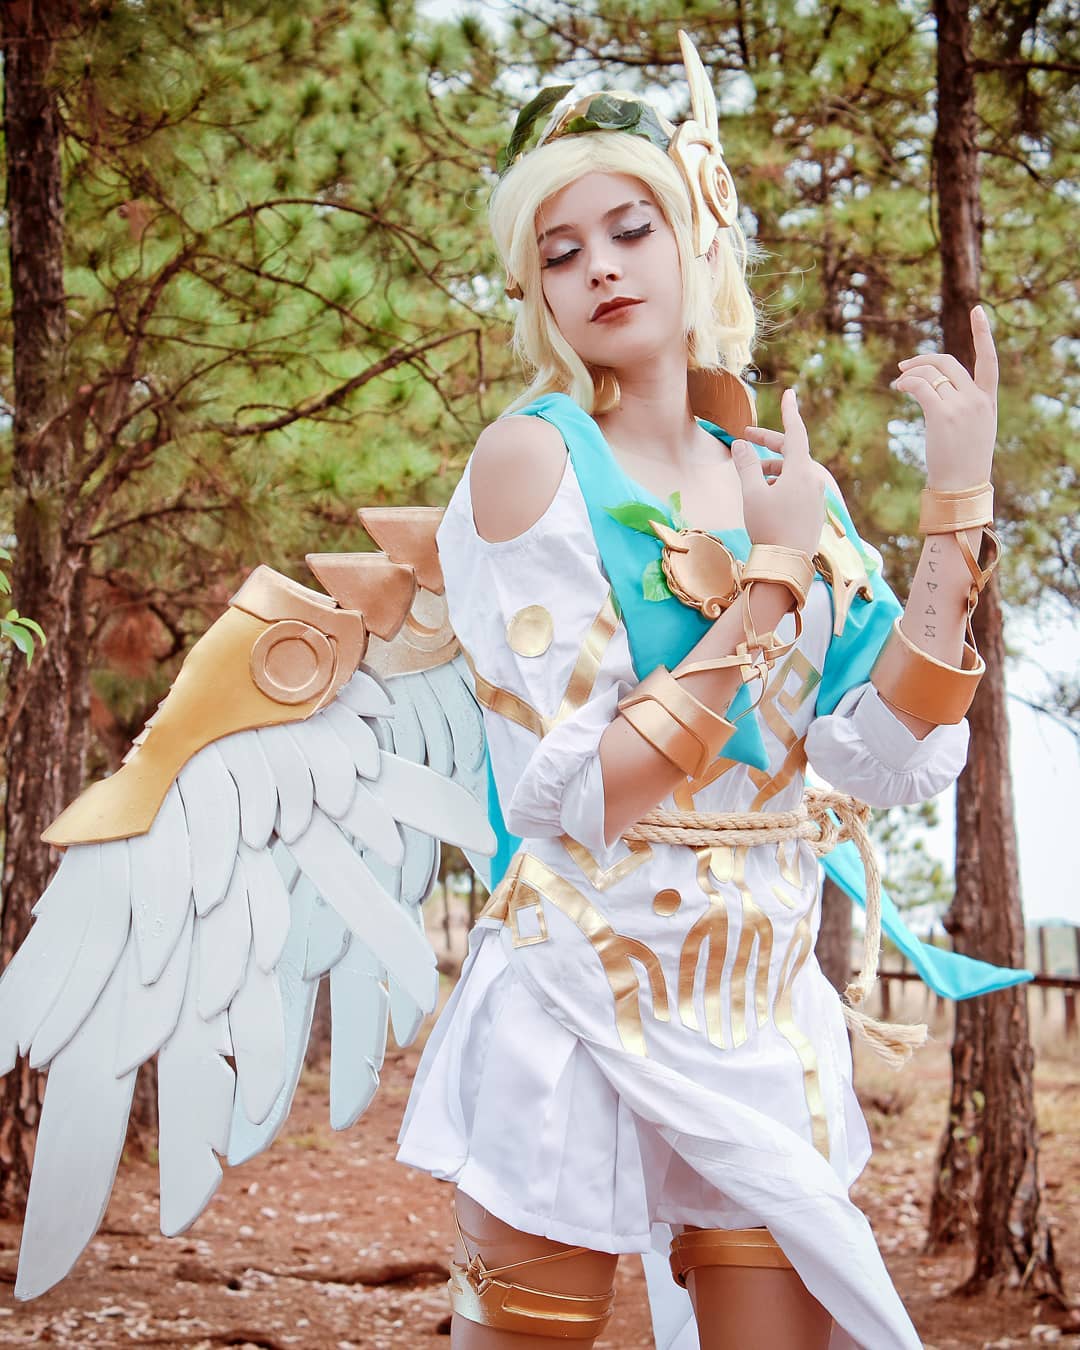 Mercy Victory Cosplay - Overwatch 2 - Rizzy 03